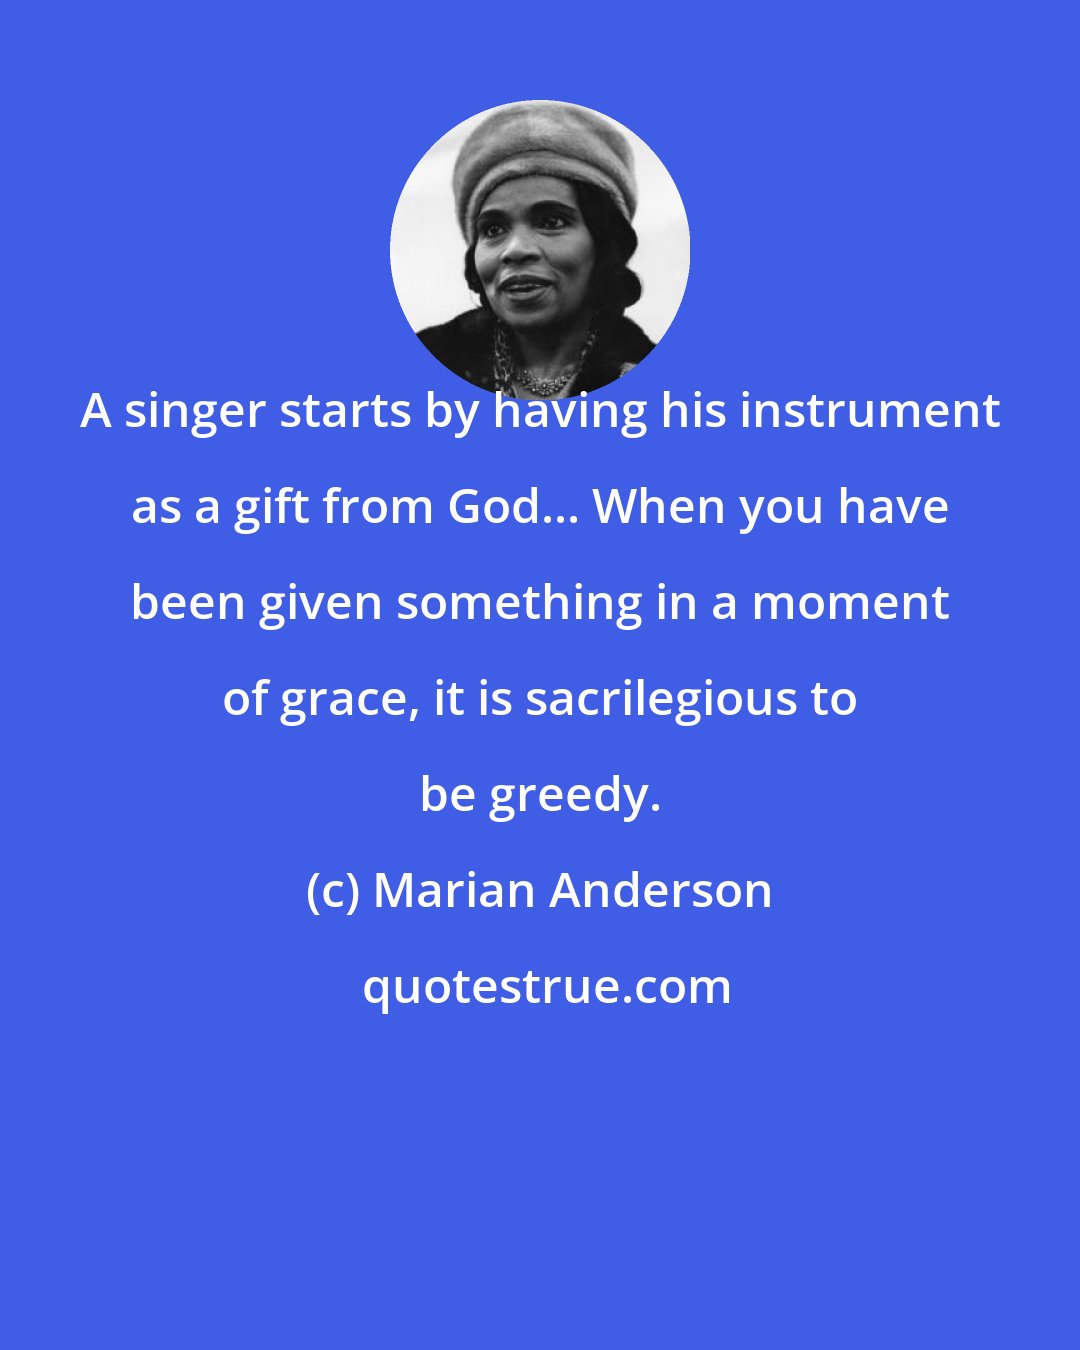 Marian Anderson: A singer starts by having his instrument as a gift from God... When you have been given something in a moment of grace, it is sacrilegious to be greedy.